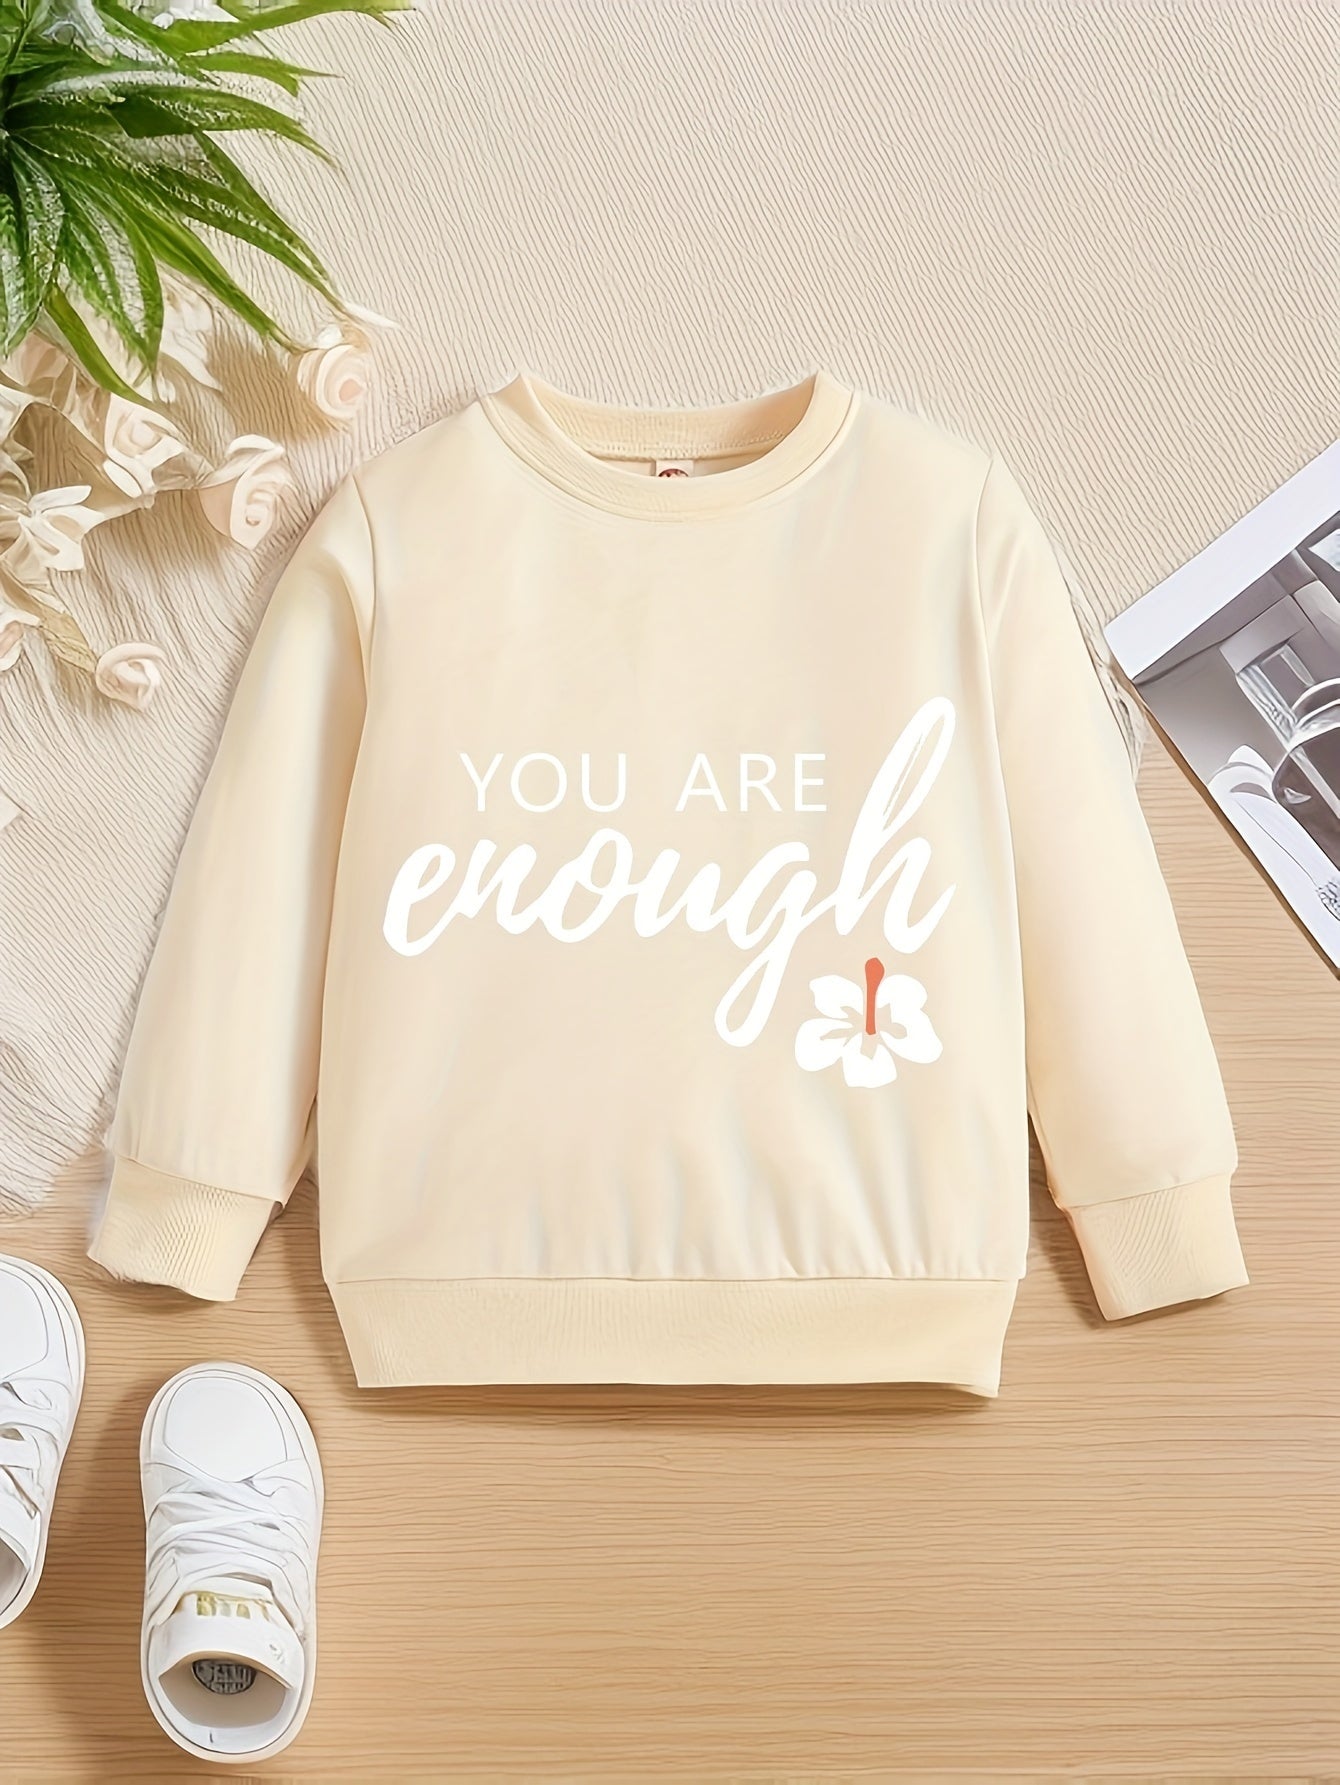 You Are Enough Youth Christian Pullover Sweatshirt claimedbygoddesigns